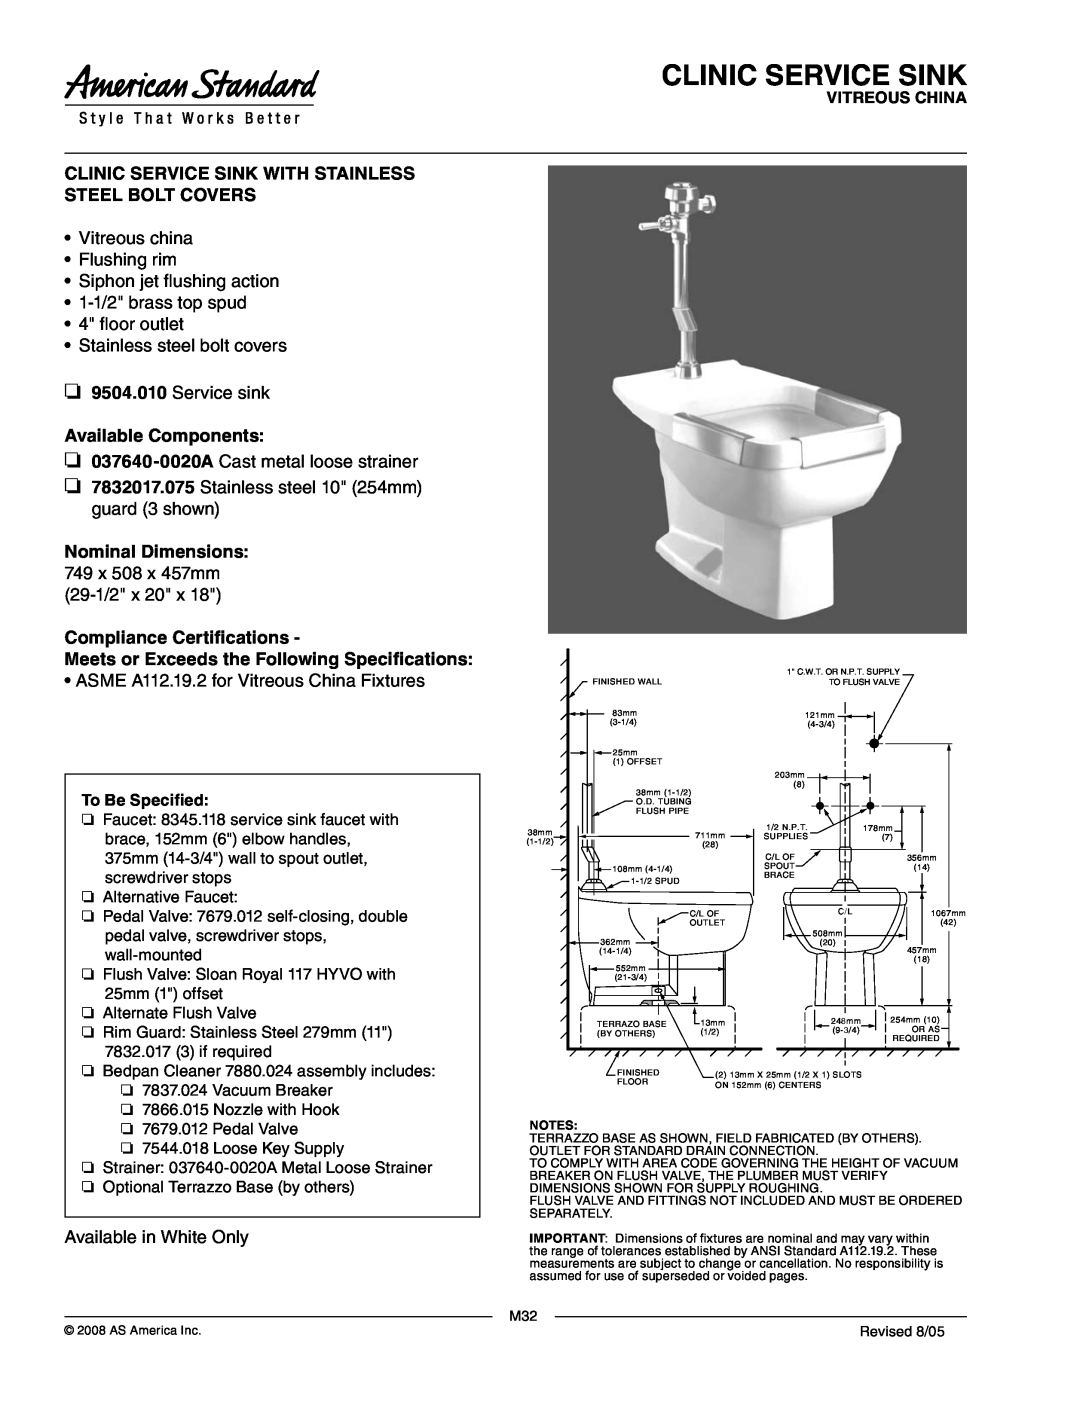 American Standard 8345.118 dimensions Clinic Service Sink, Vitreous china Flushing rim, Service sink, Available Components 